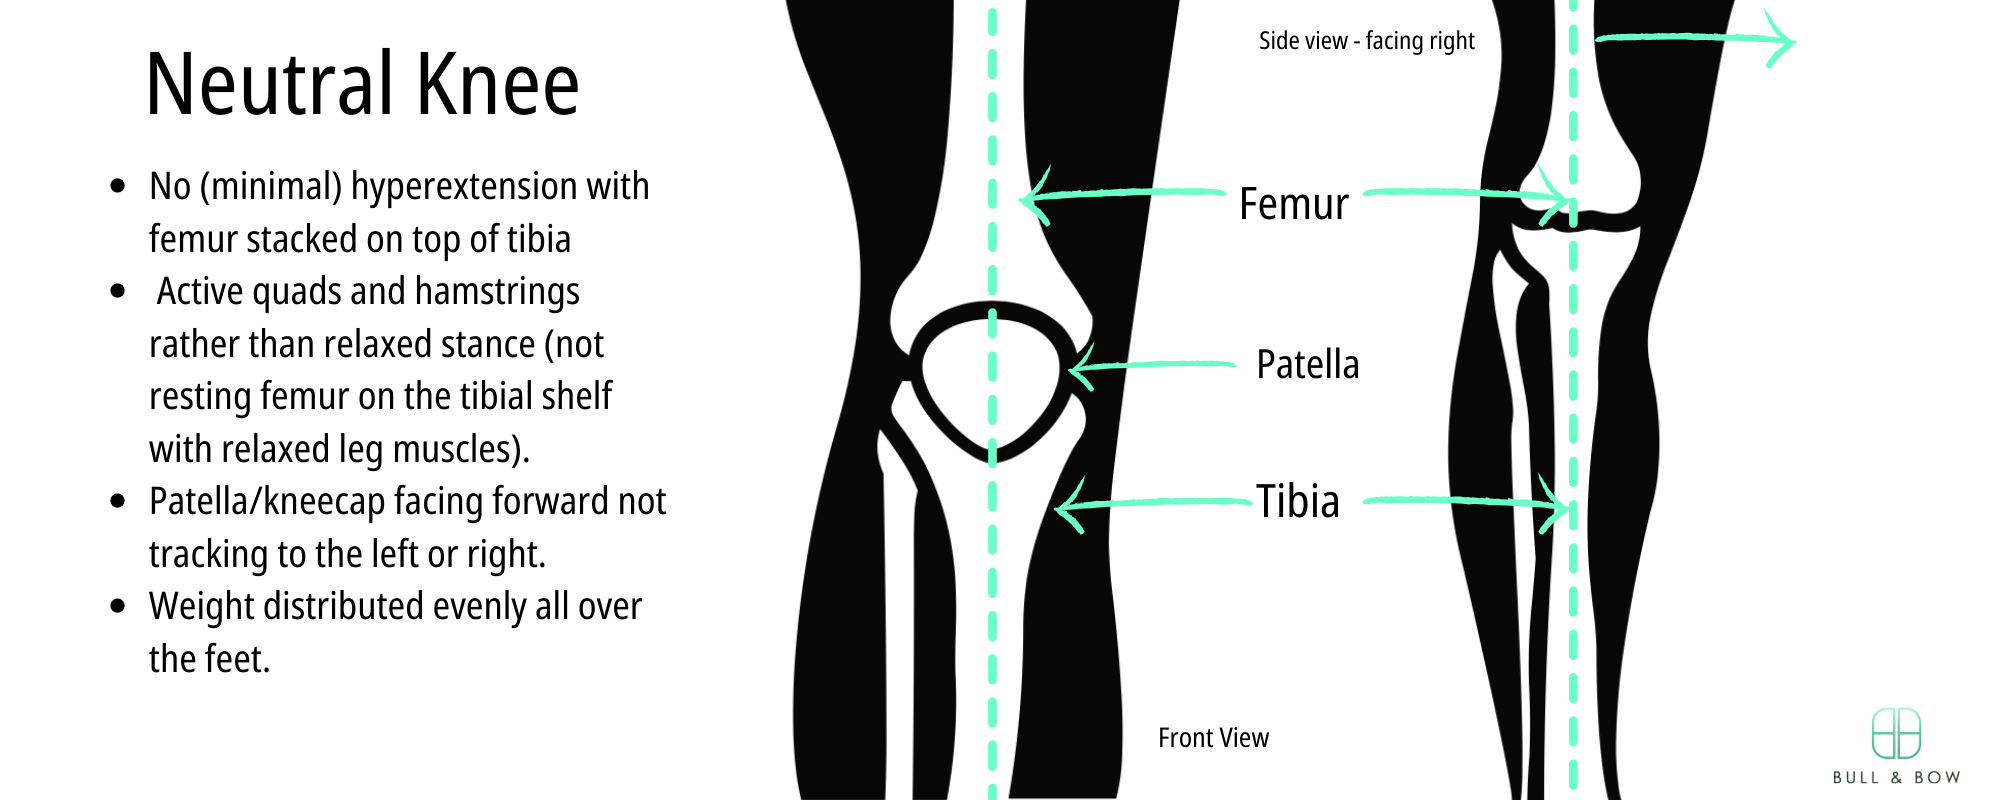 Neutral or locked knee description with side and front view of knee joint.